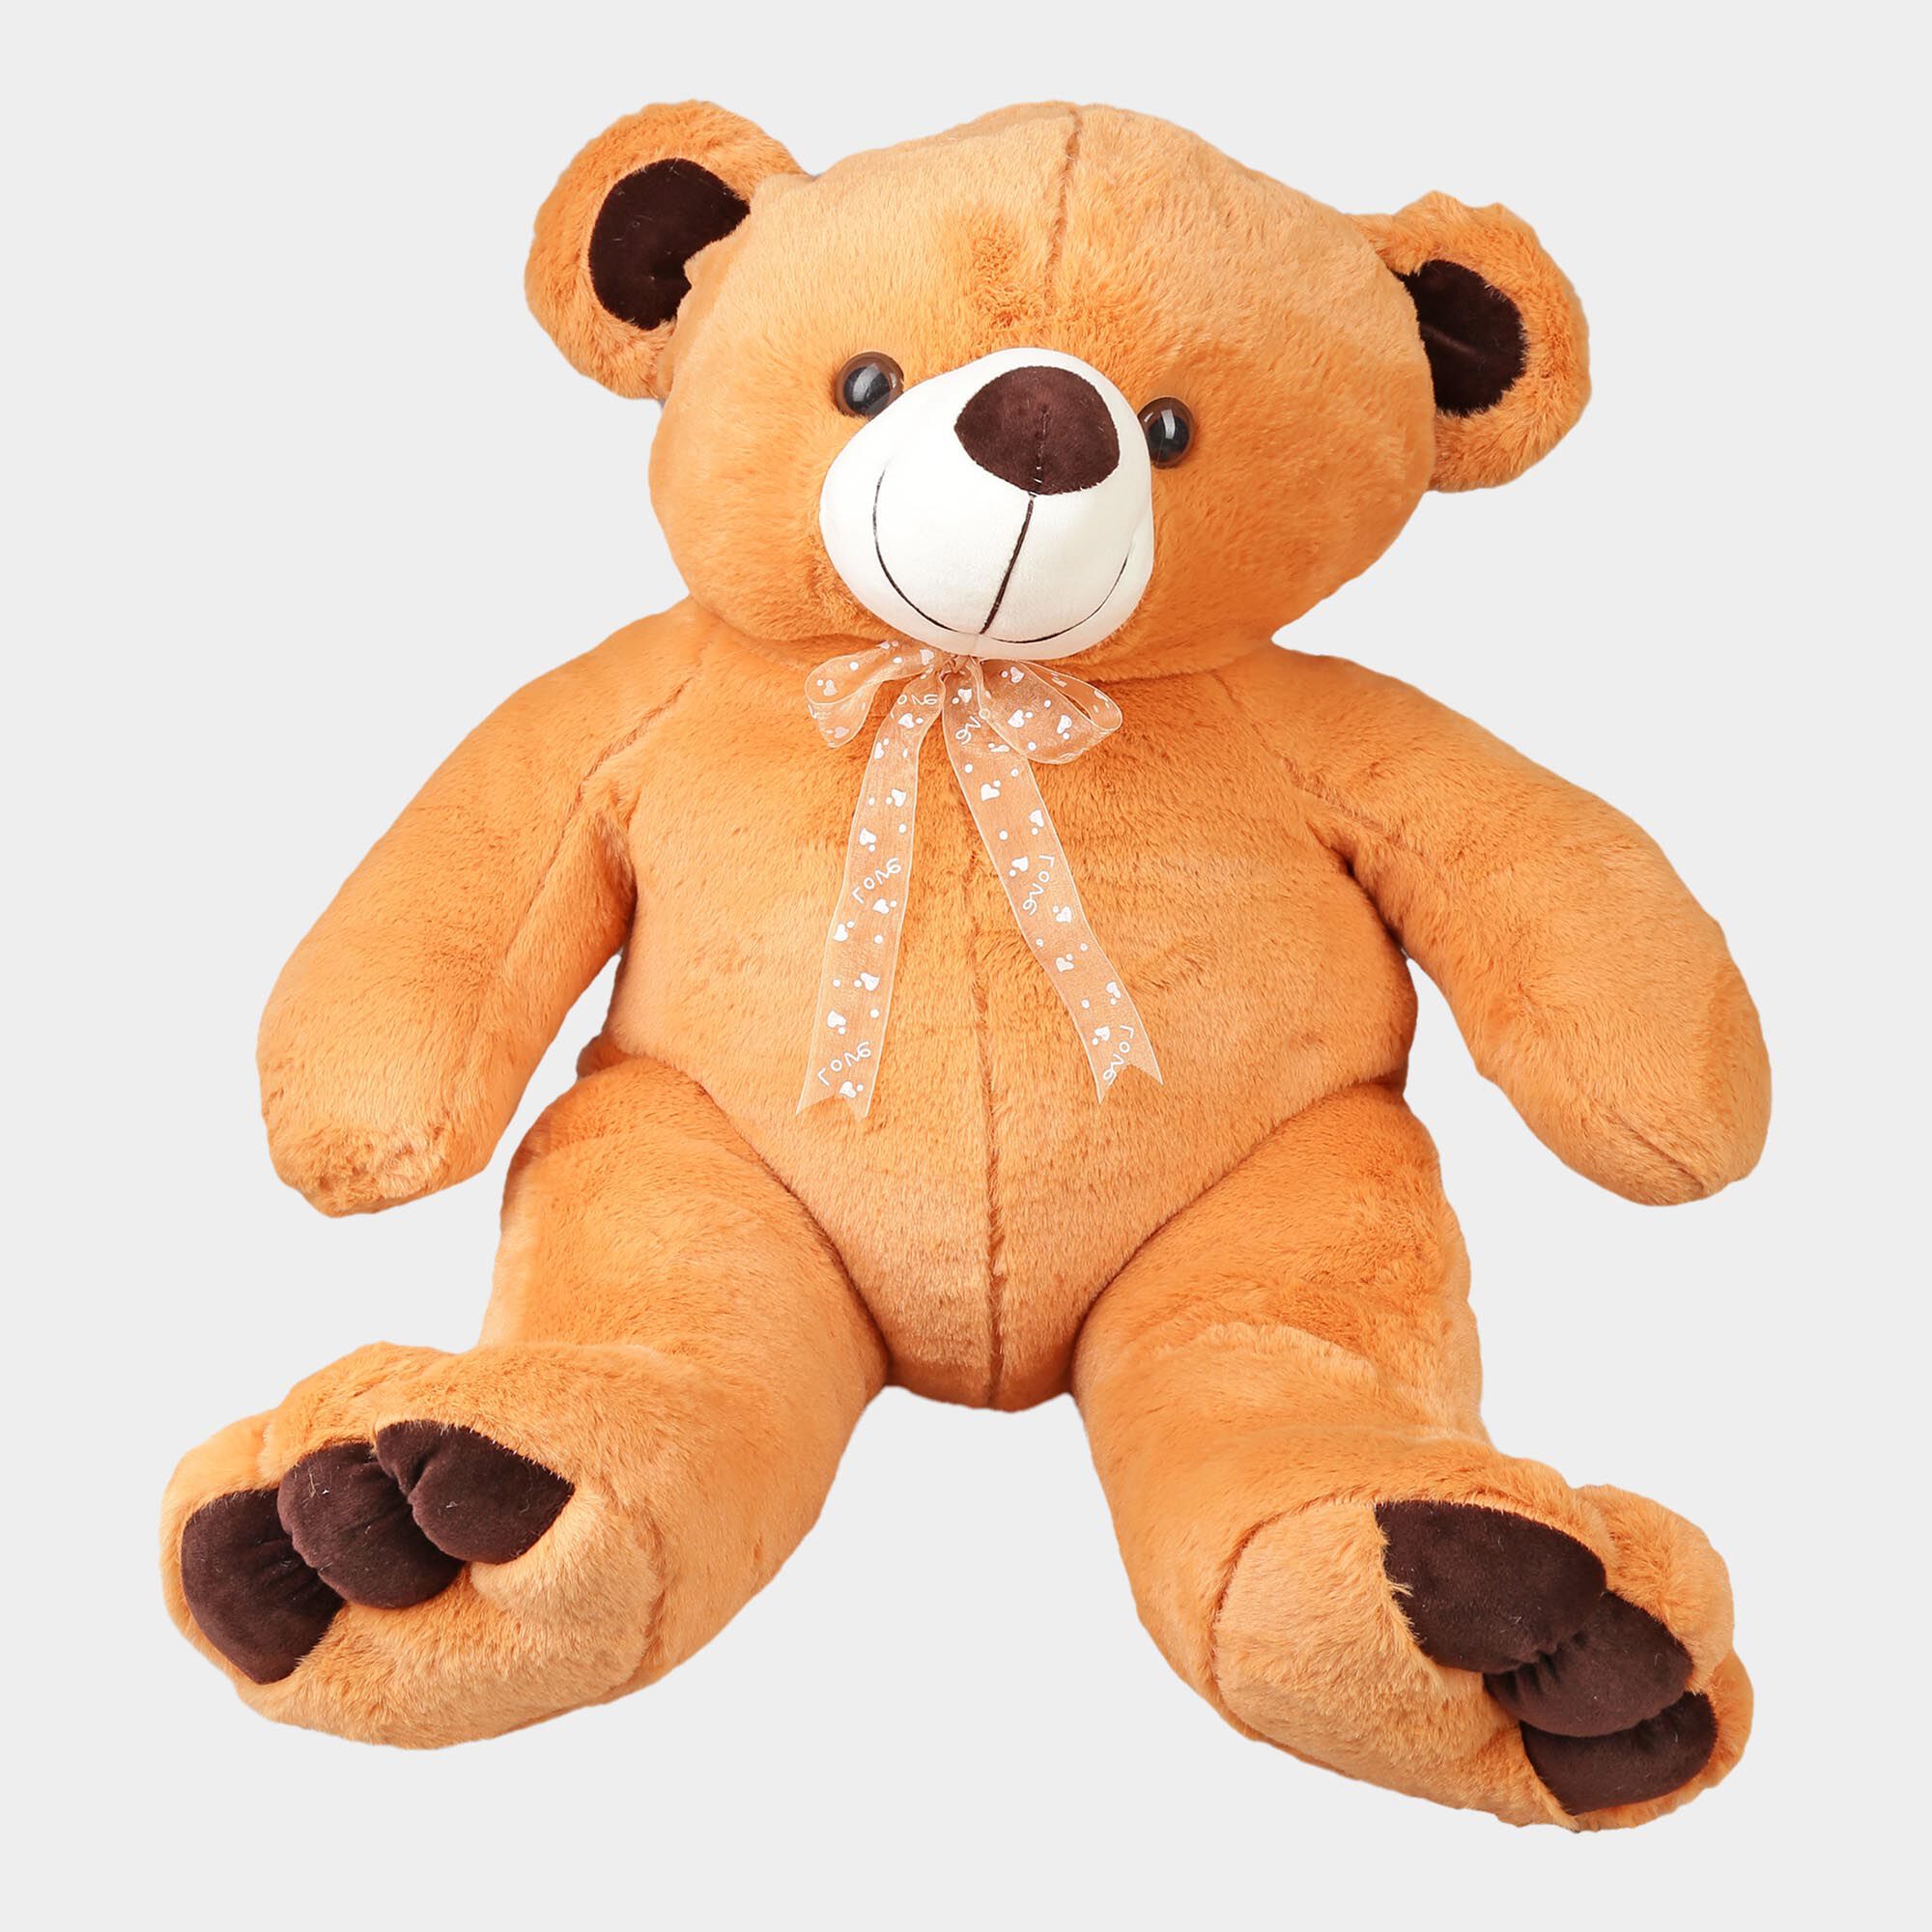 360by24 Chocolate Colour Teddy Bear - 91 cm - Chocolate Colour Teddy Bear .  Buy Teddy Bear toys in India. shop for 360by24 products in India. |  Flipkart.com